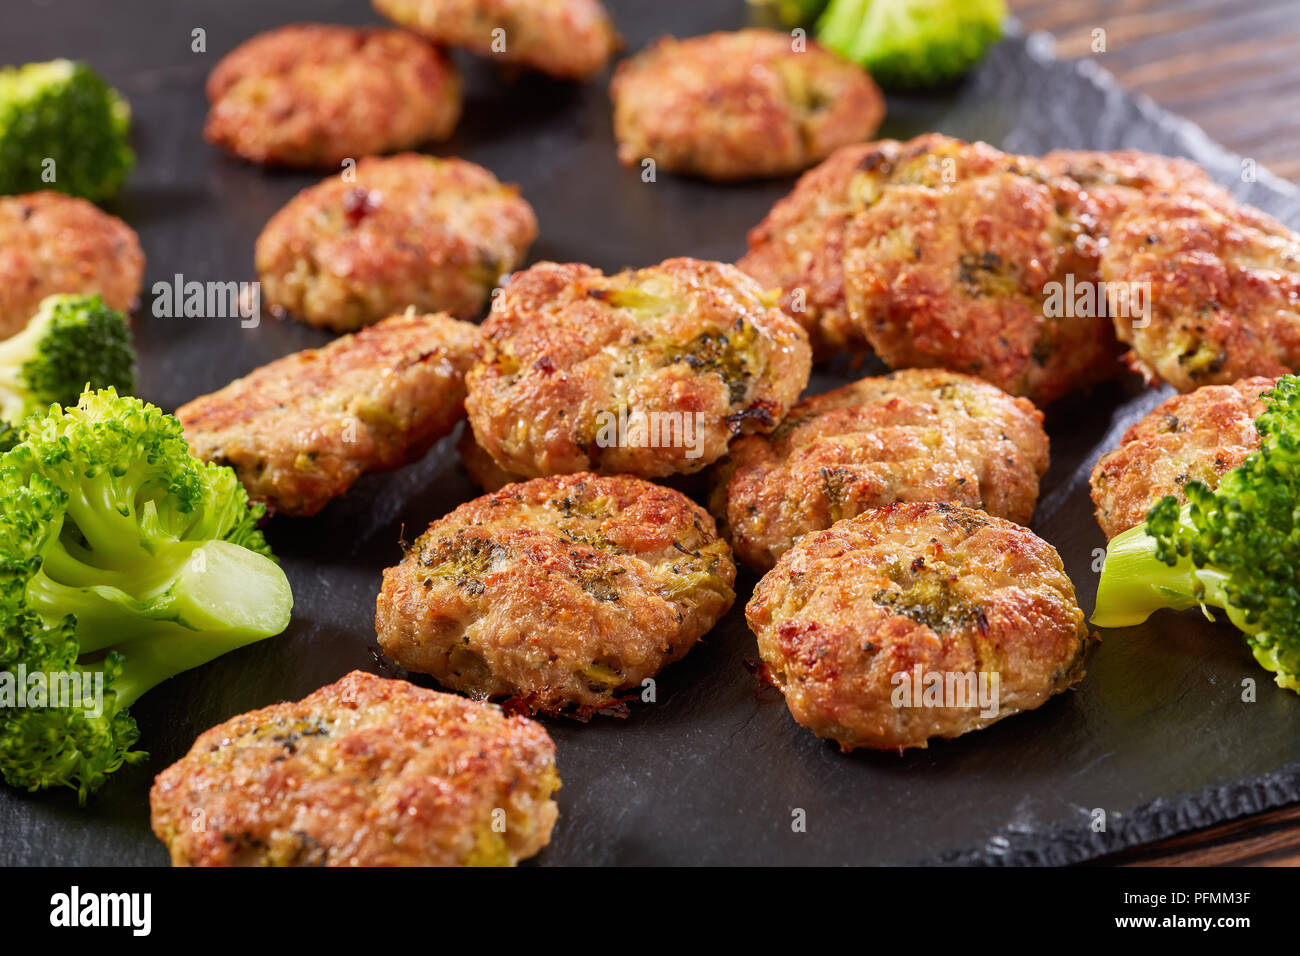 delicious baked meat broccoli patties with grated cheese, and spices on black slate tray on wooden table, healthy low calories recipe, view from above Stock Photo